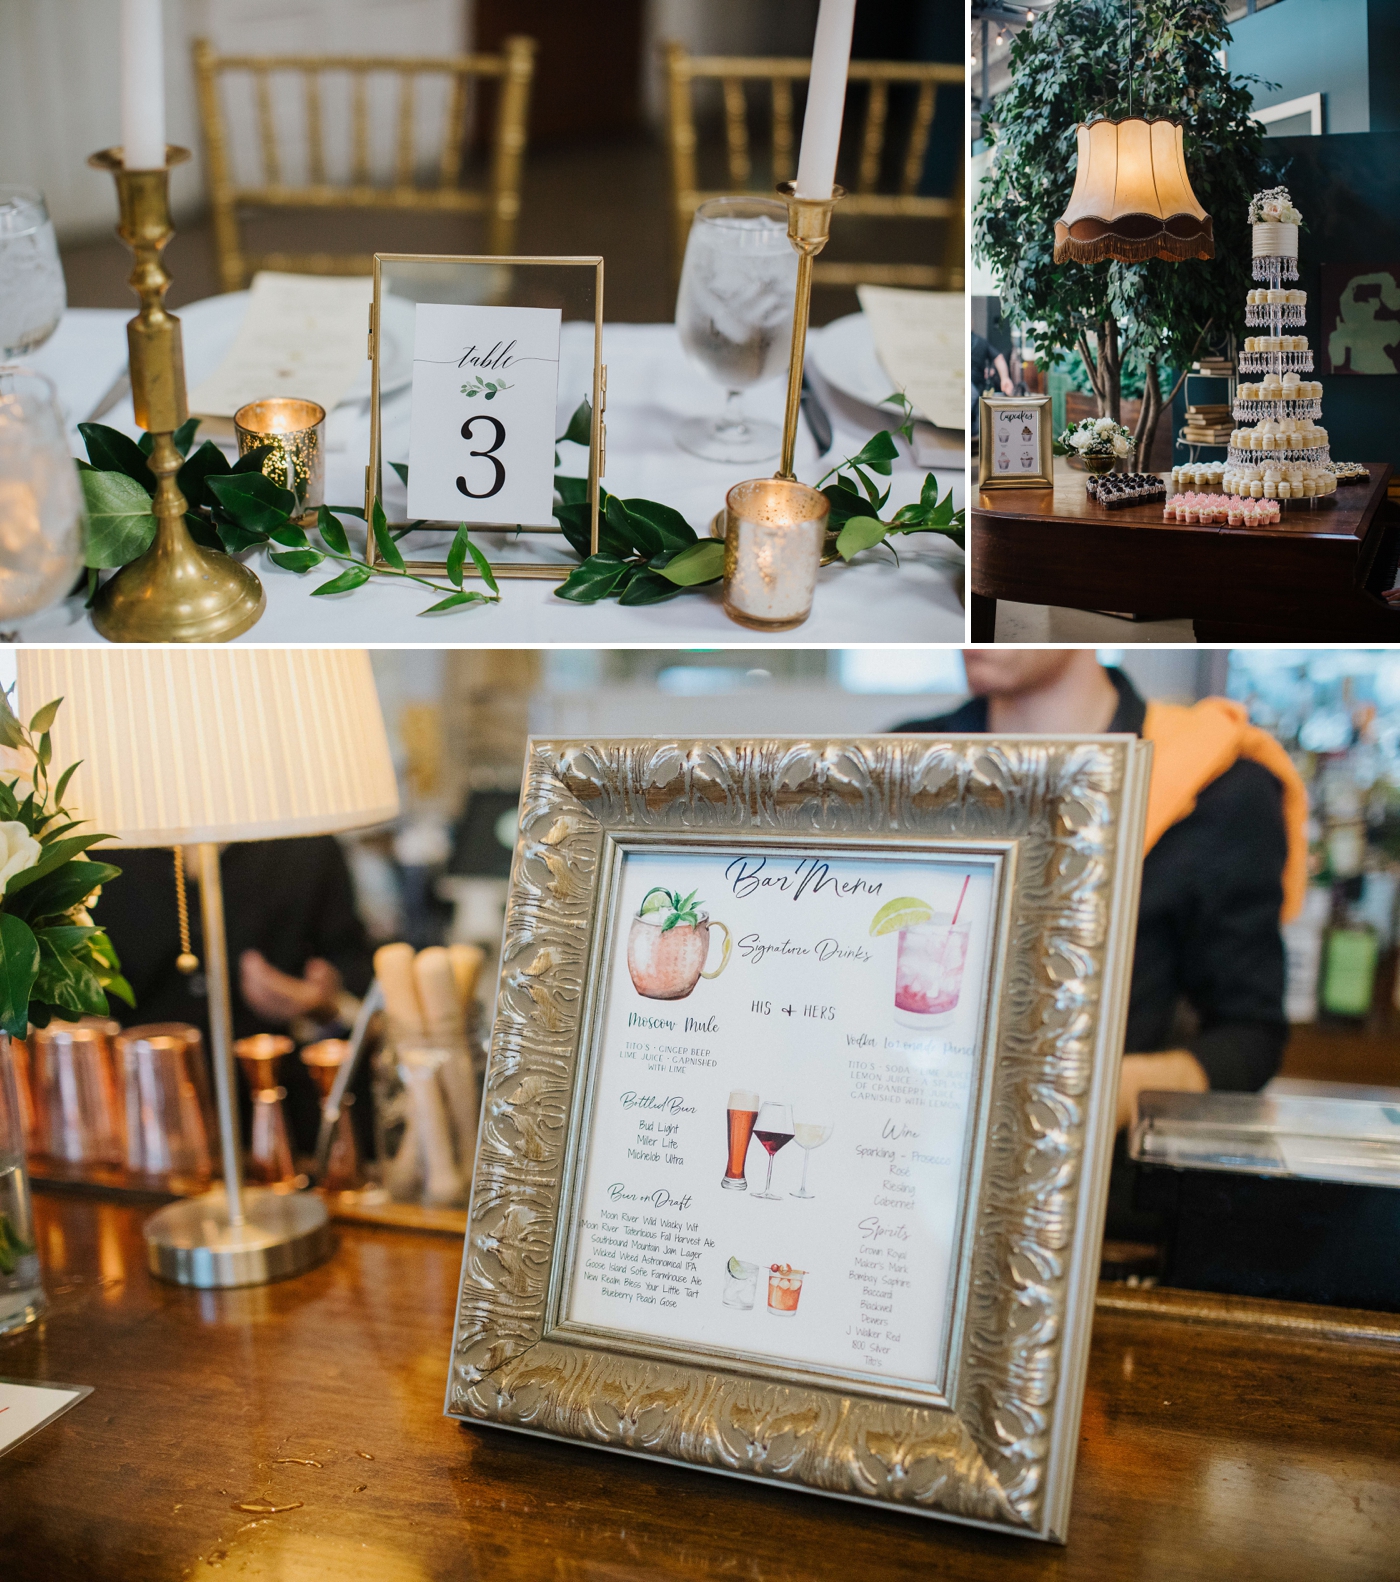 Wedding Reception at Soho South Cafe in Savannah | Izzy and Co.